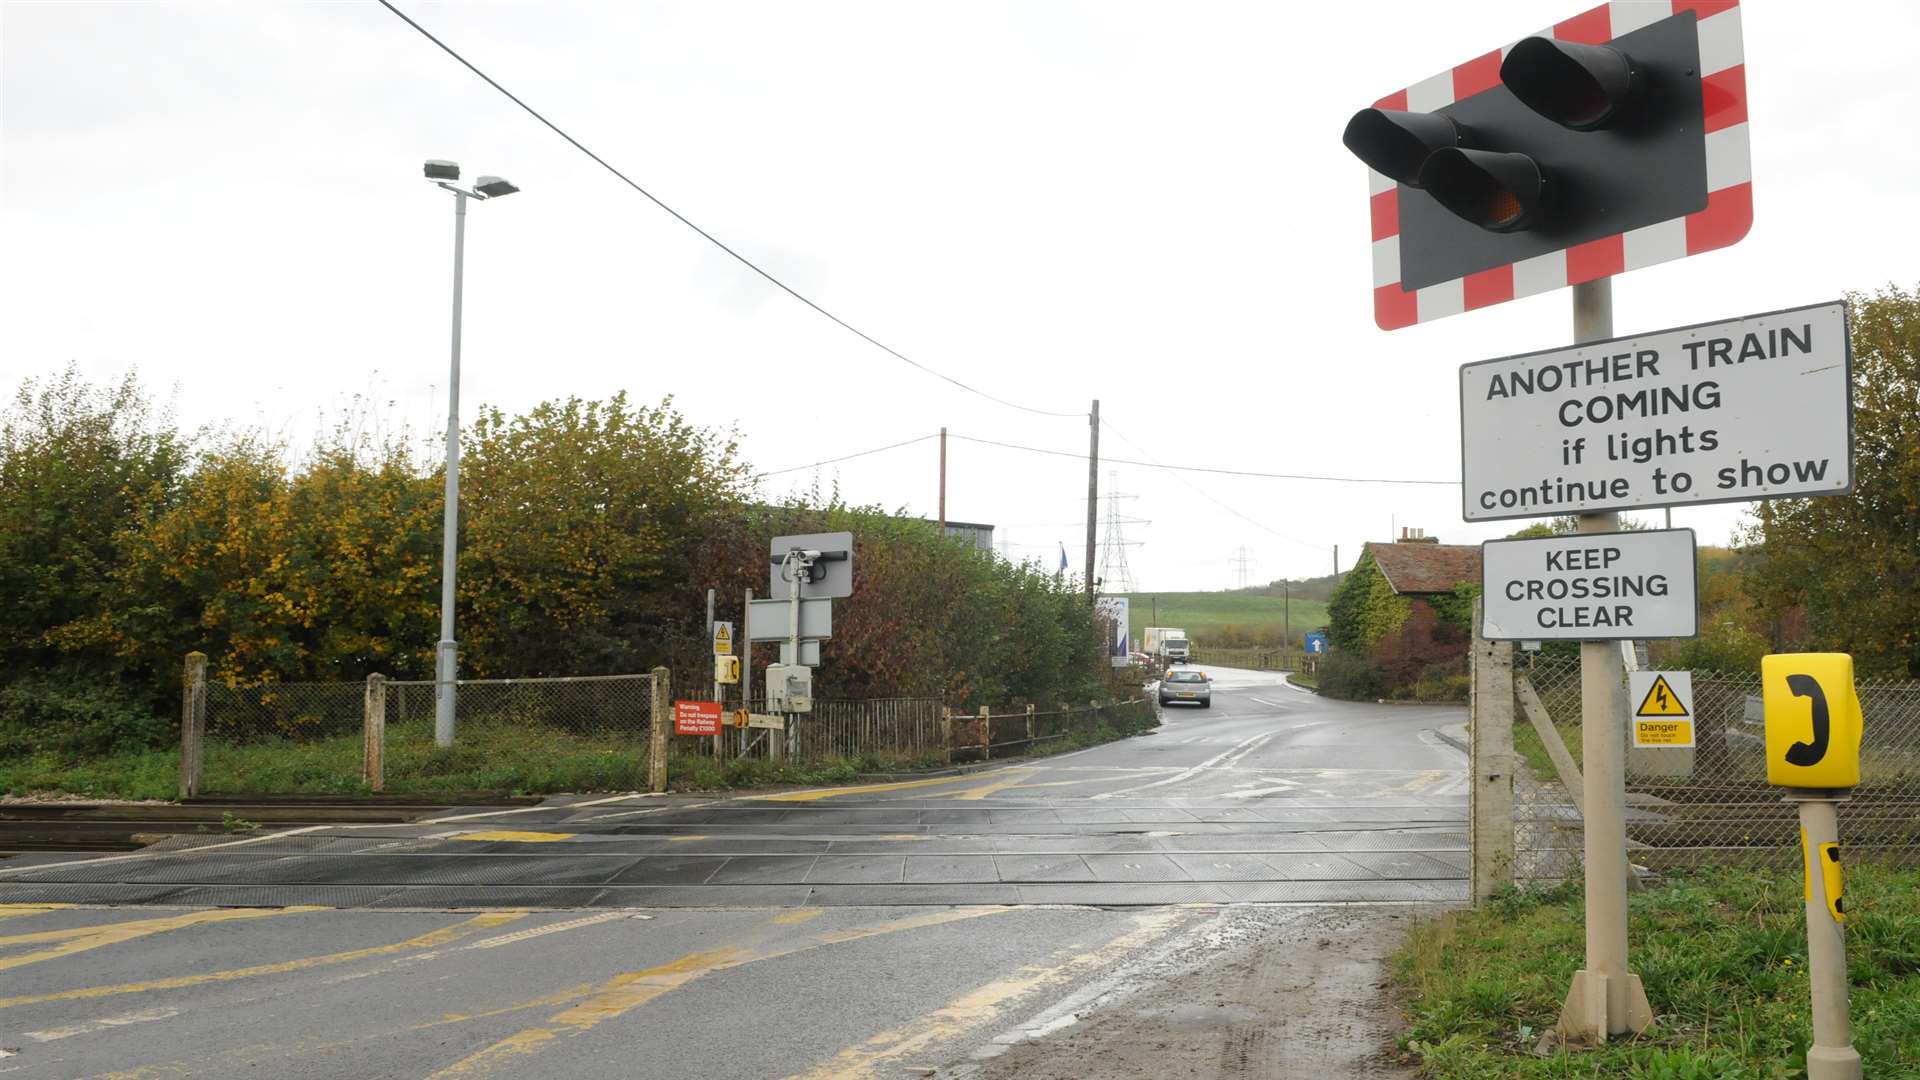 The level crossing barrier is shut at Broad Oak.